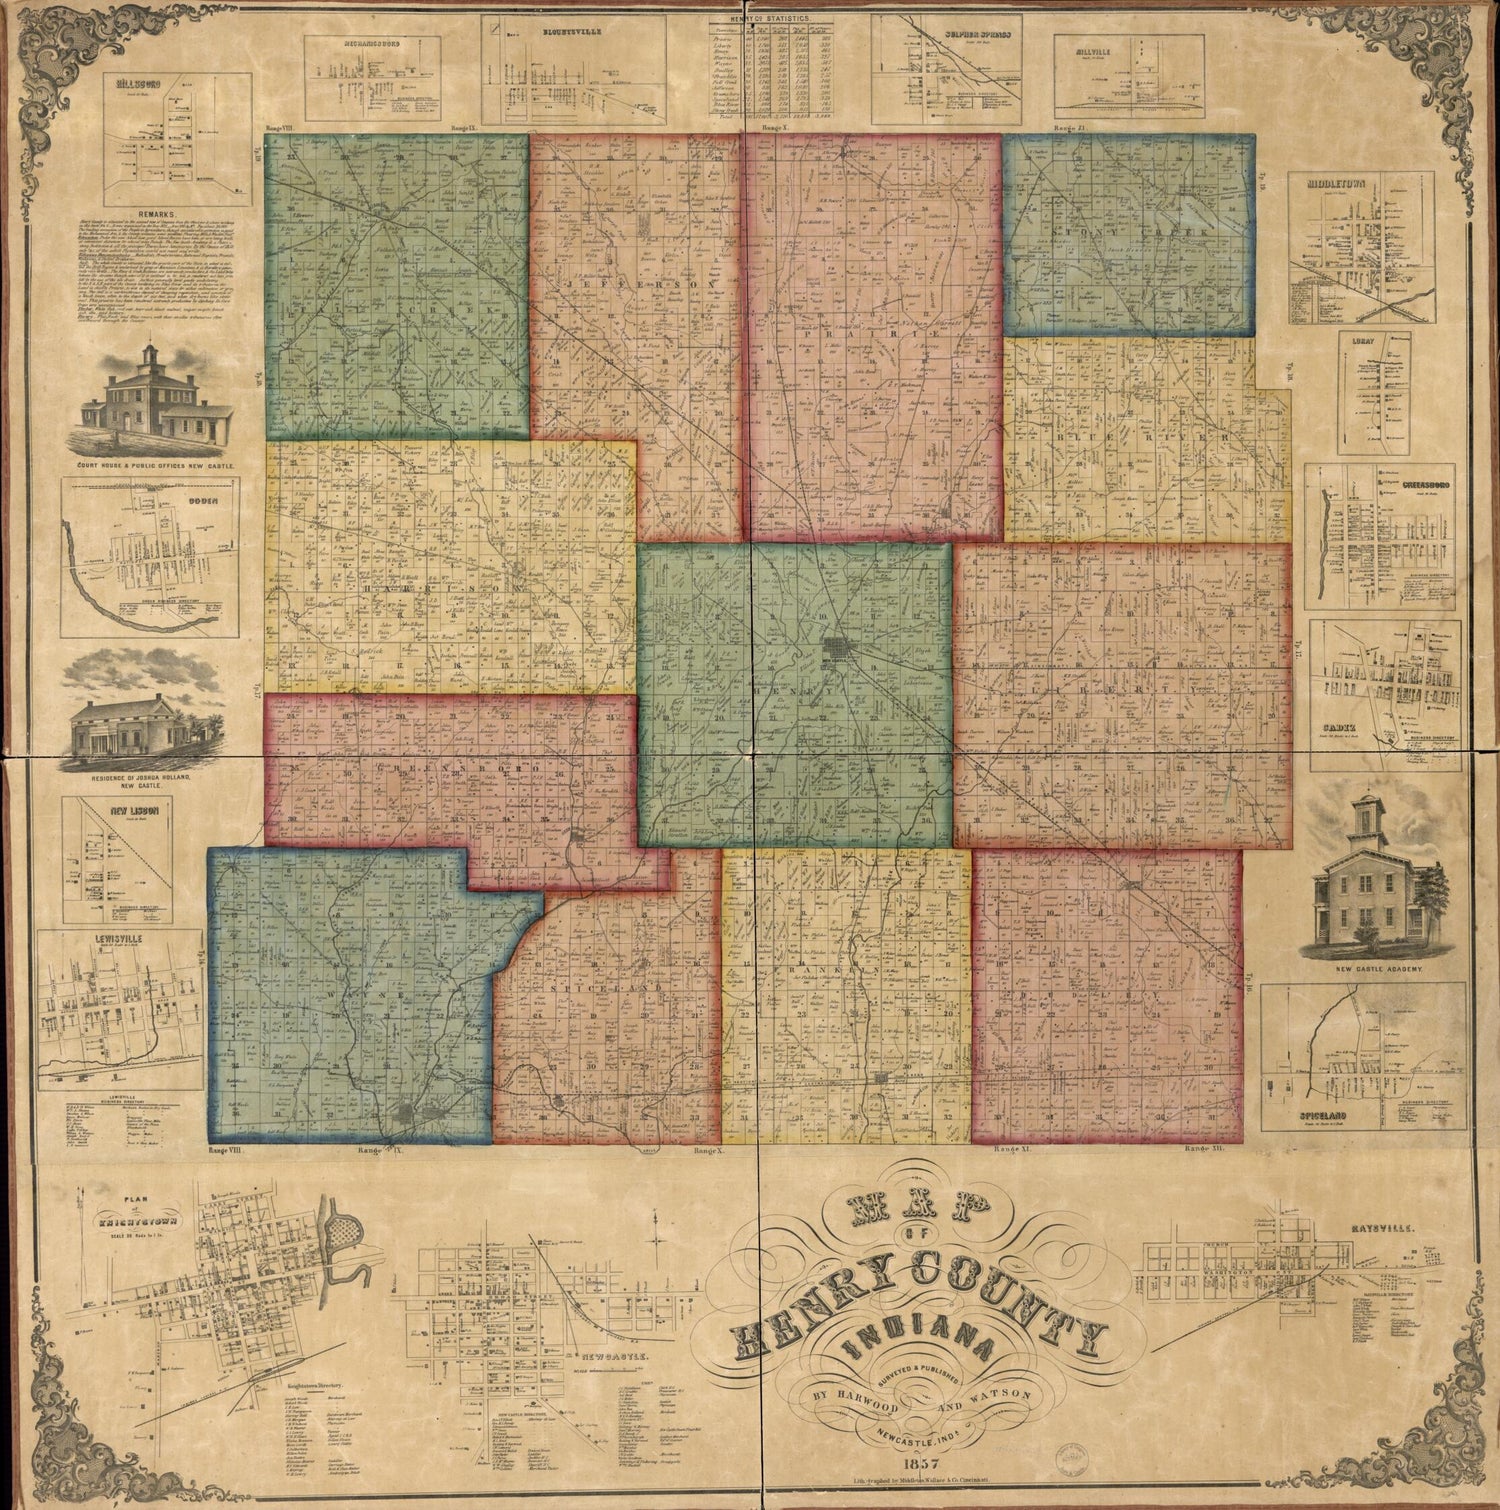 This old map of Map of Henry County, Indiana from 1857 was created by  Harwood &amp; Watson in 1857